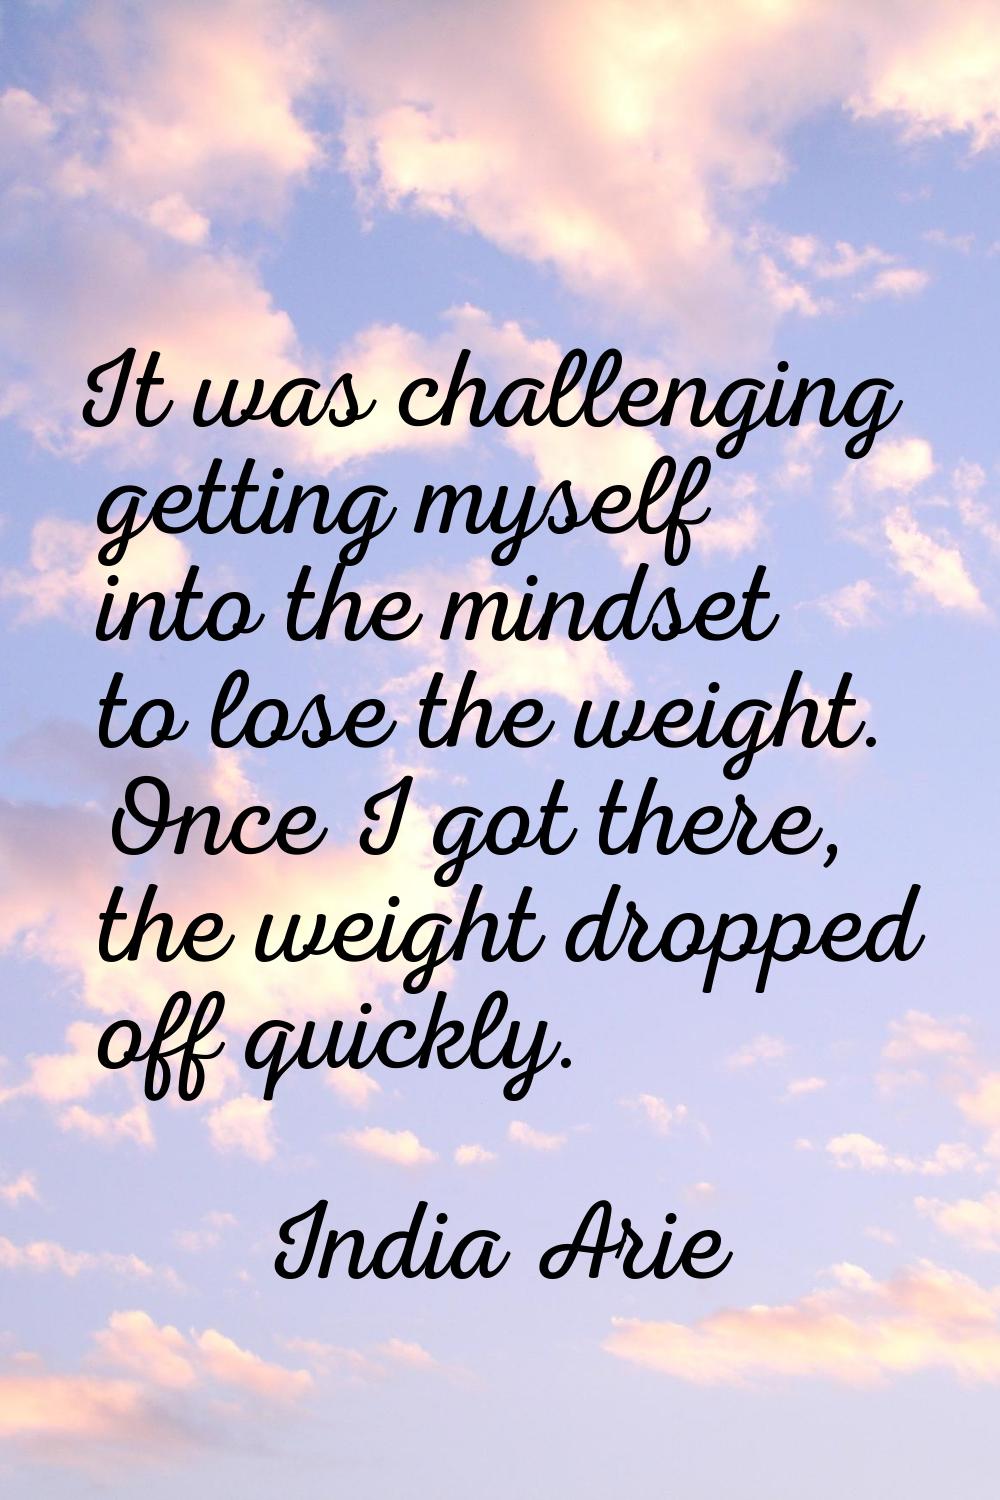 It was challenging getting myself into the mindset to lose the weight. Once I got there, the weight